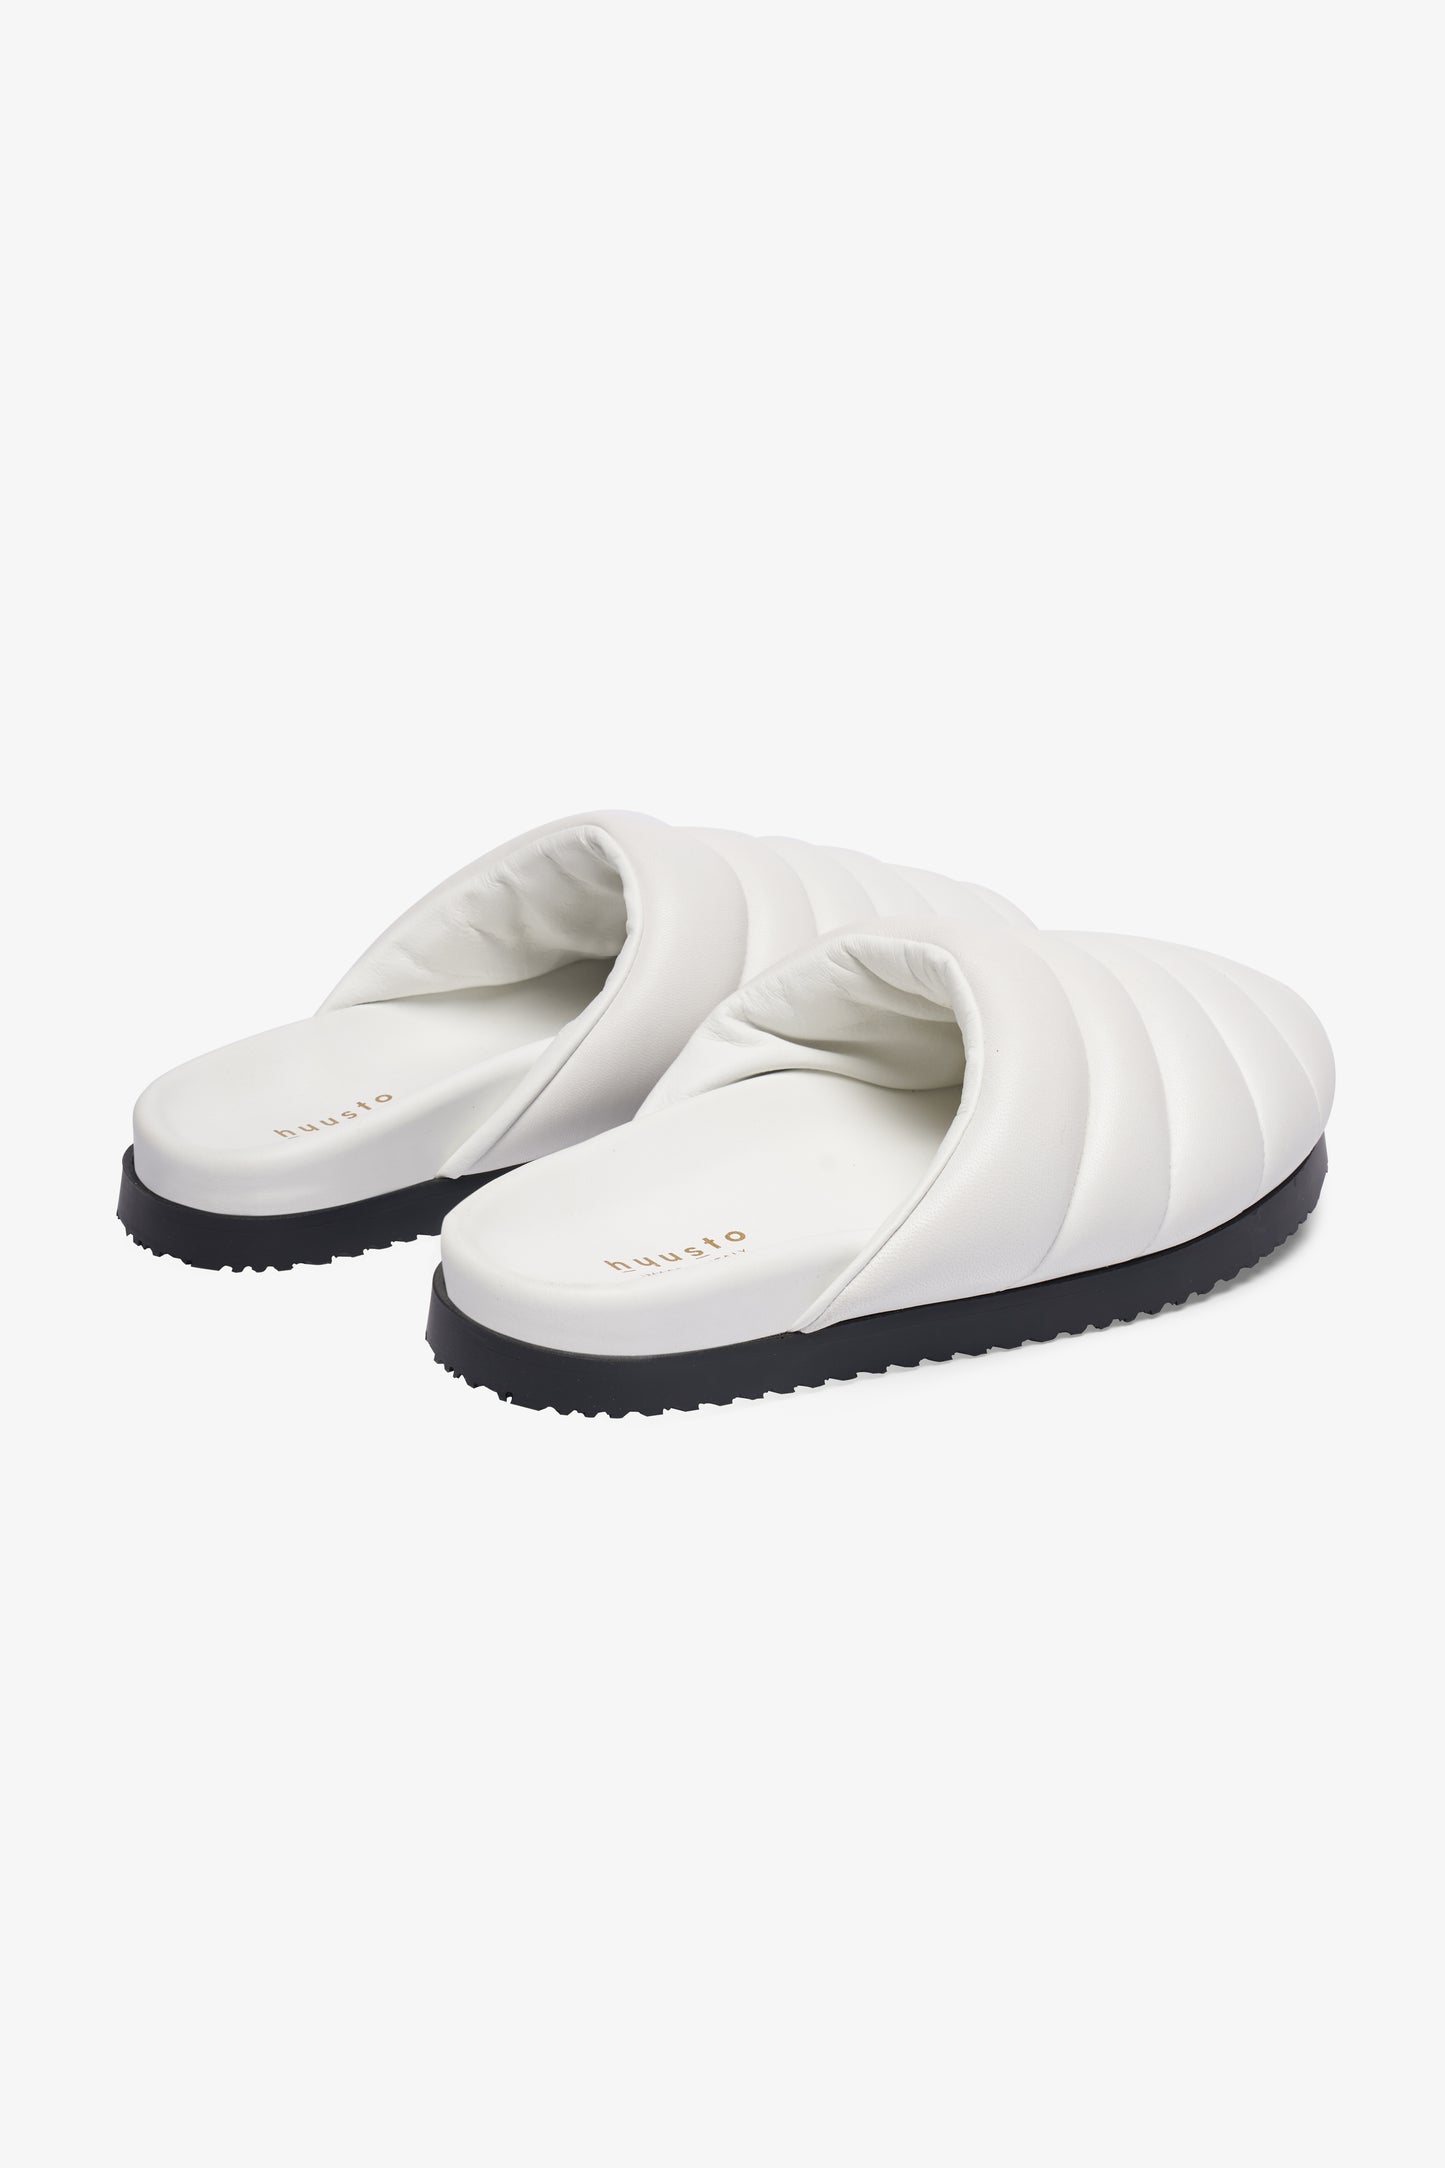 Quincy Padded White Nappa